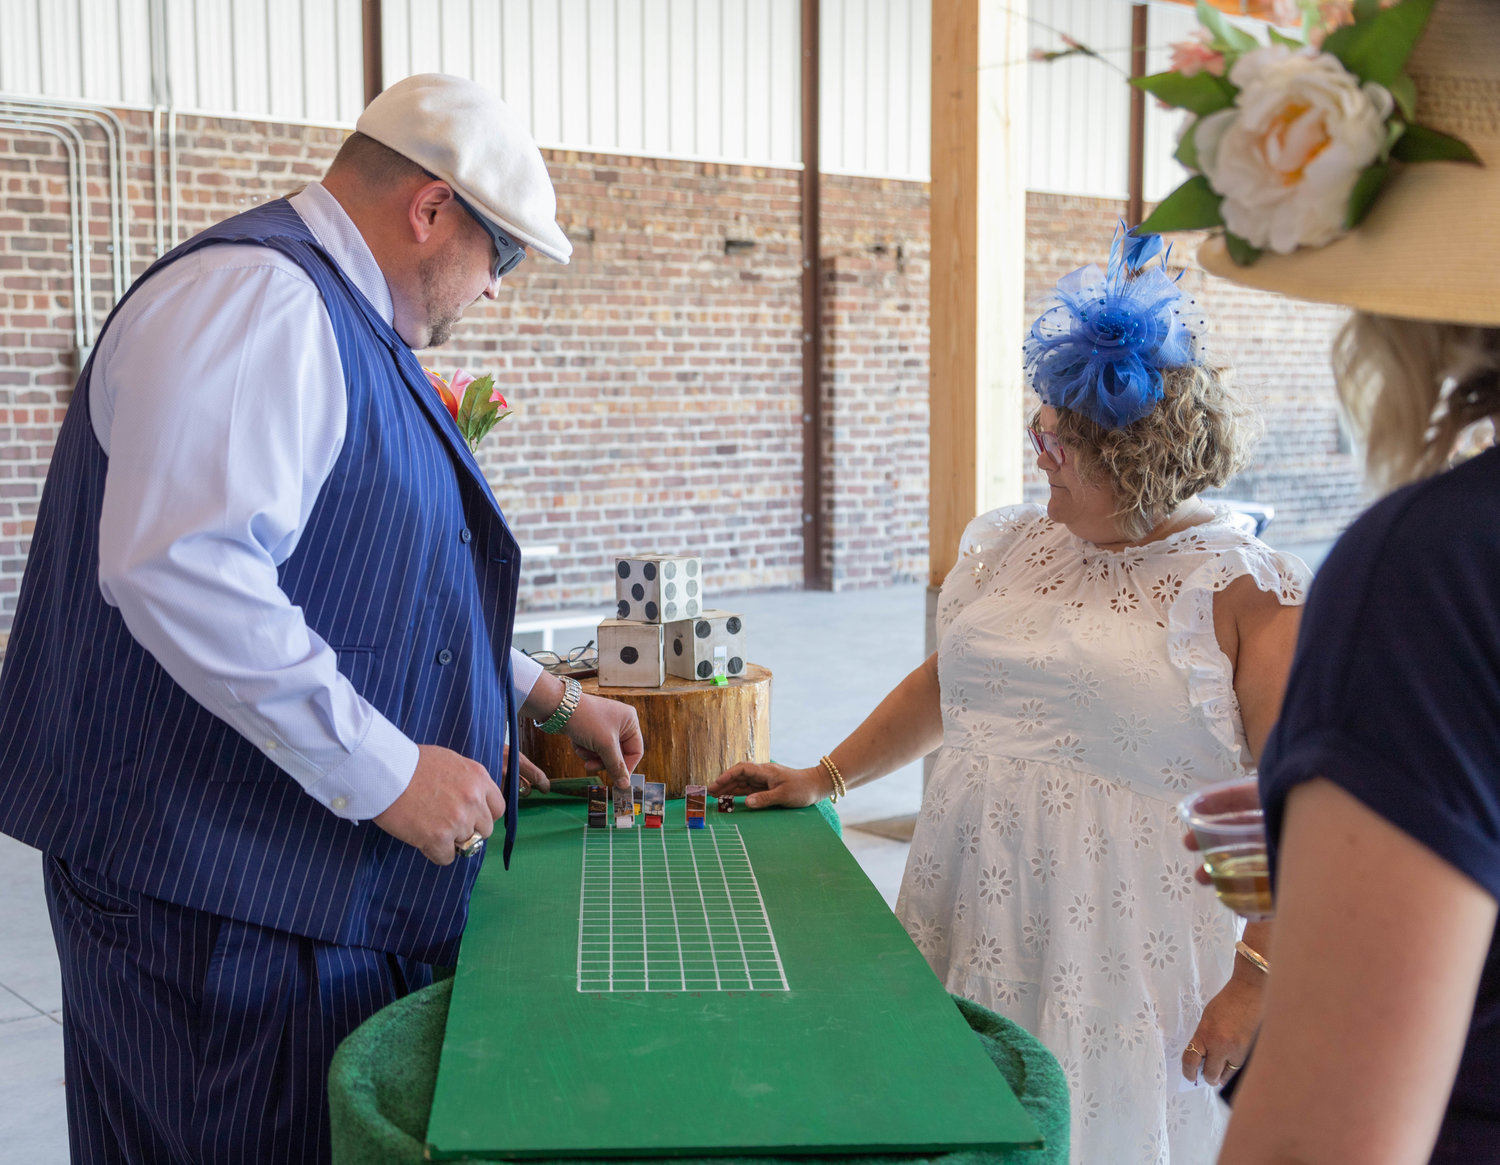 Curtis Walk and Deb Haag throw dice and race horses before the Moberly Area Chamber of Commerce Banquet Saturday. Formal dress, ladies hats and horse-racing games kept to the banquet’s Kentucky Derby theme.